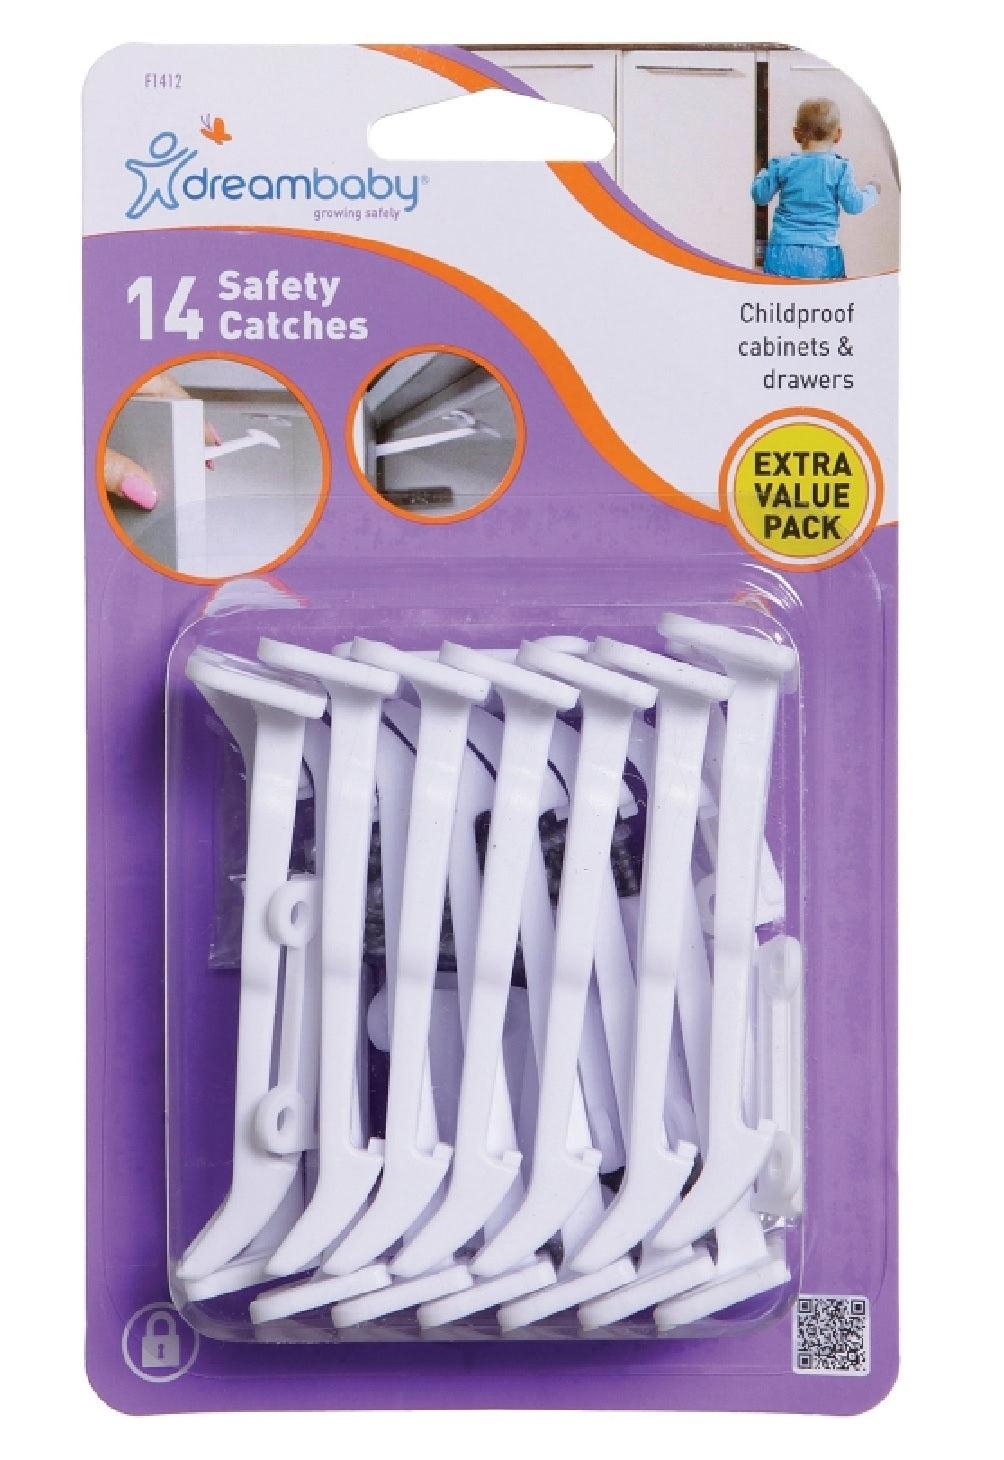 Dreambaby L1412 Secure Safety Catches, White, Plastic